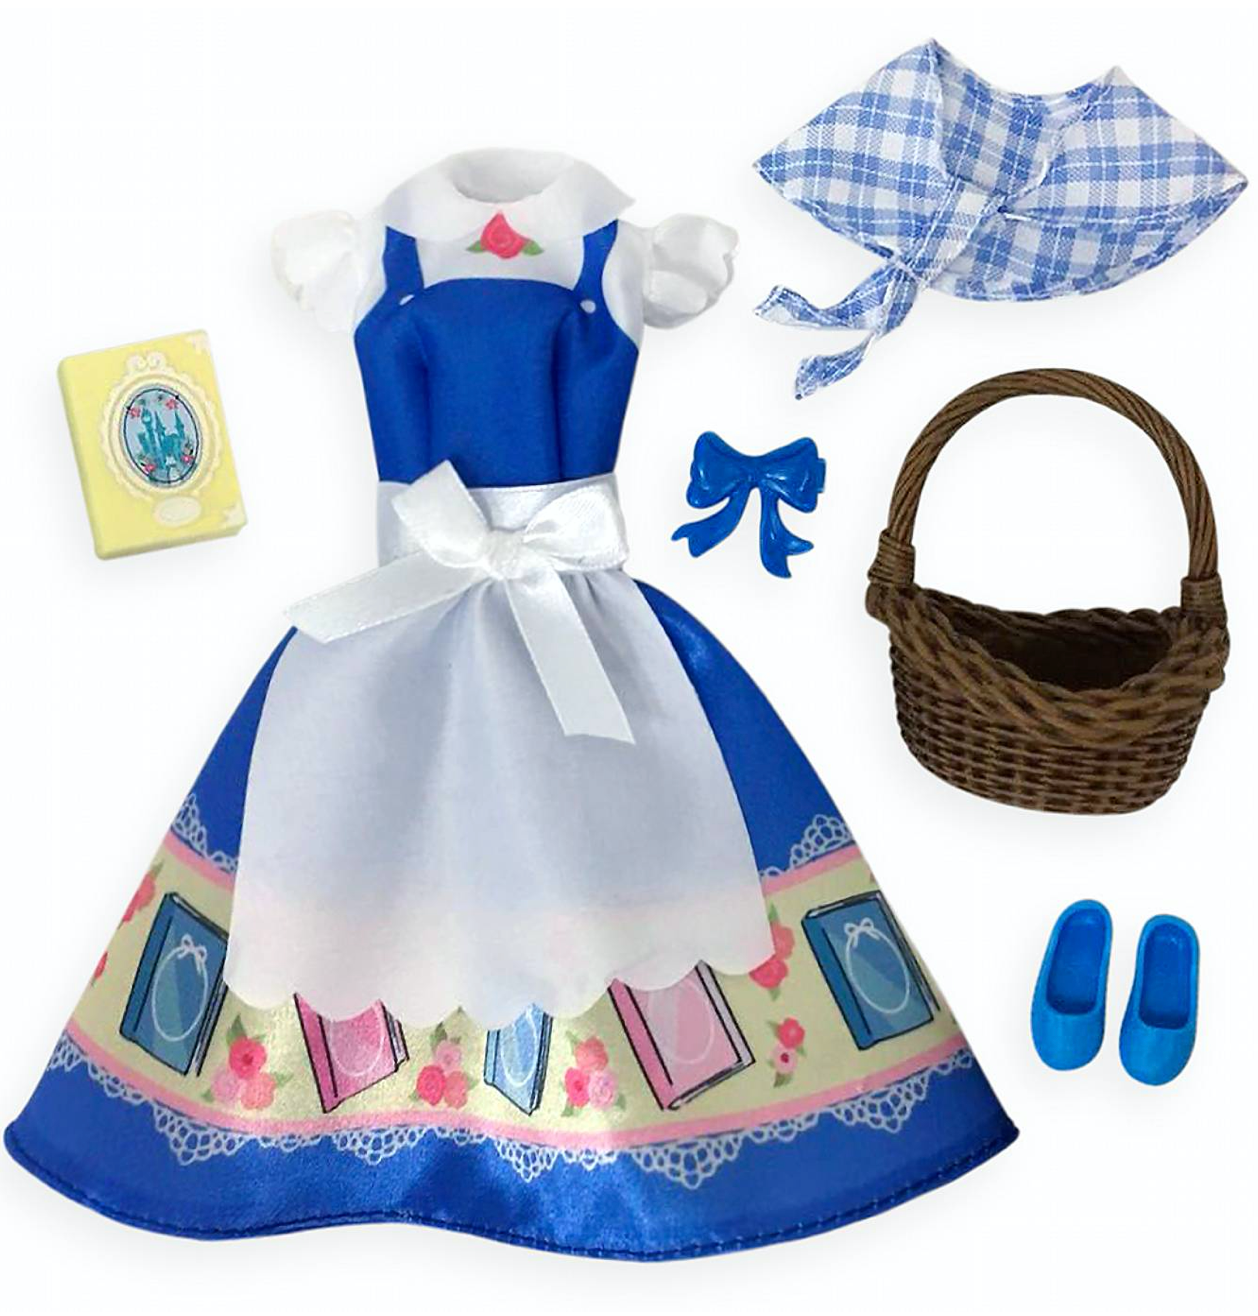 Disney Belle Classic Doll Accessory Pack New with Box